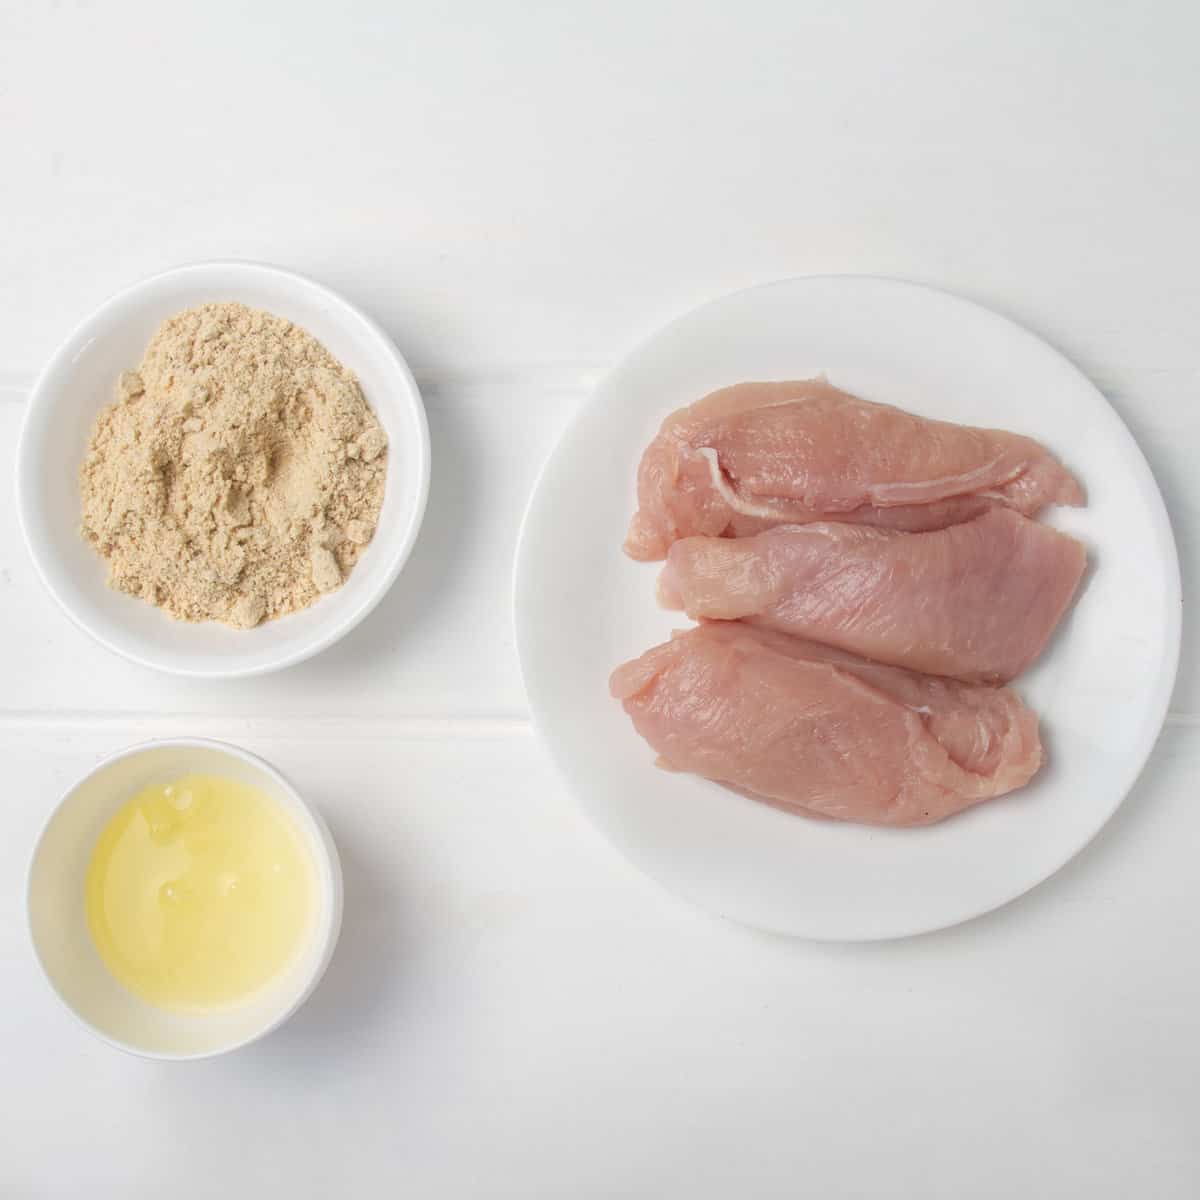 Raw skinless, boneless chicken breasts, egg whites, and Italian breadcrumbs. 